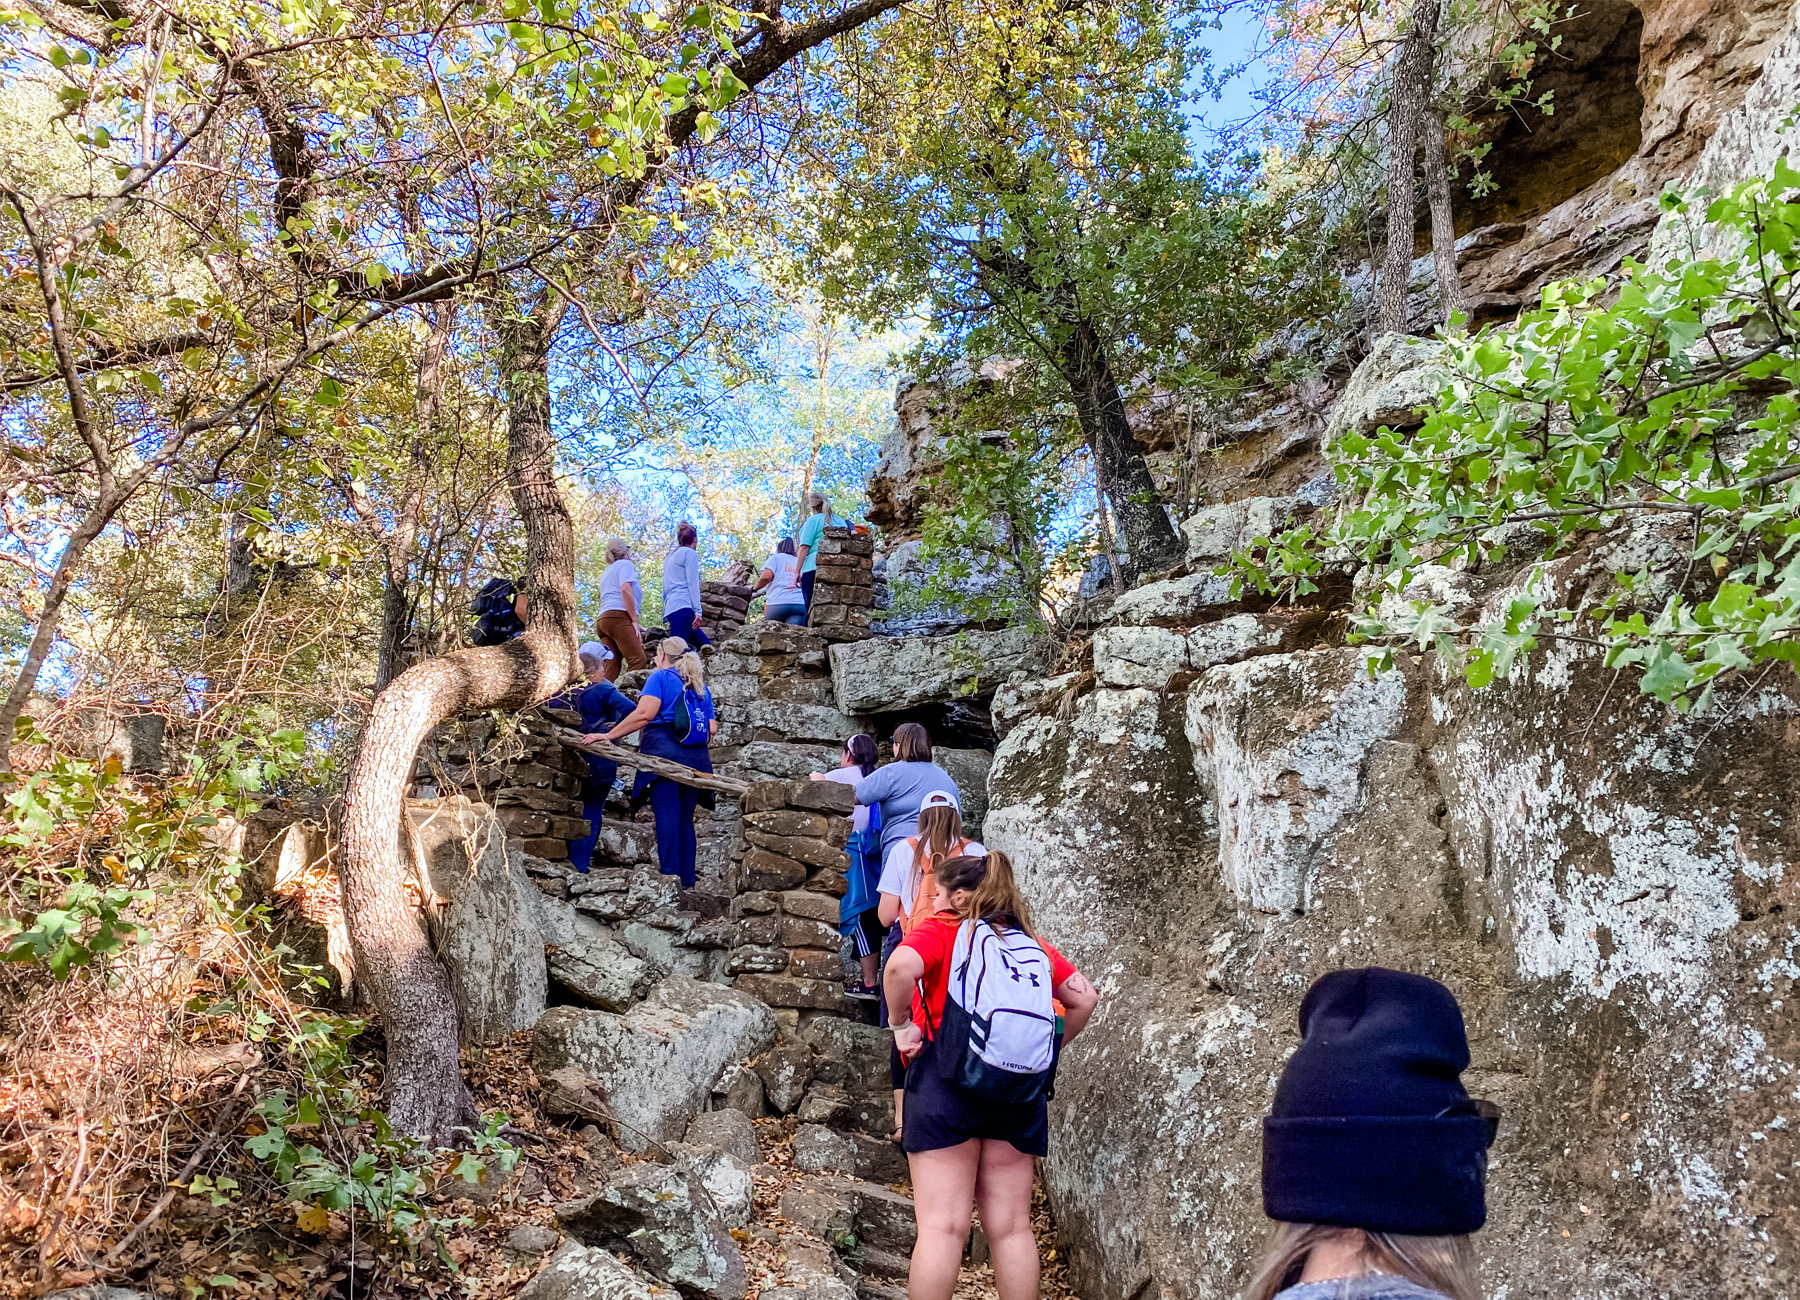 Hikers on Penitentiary Hollow trail